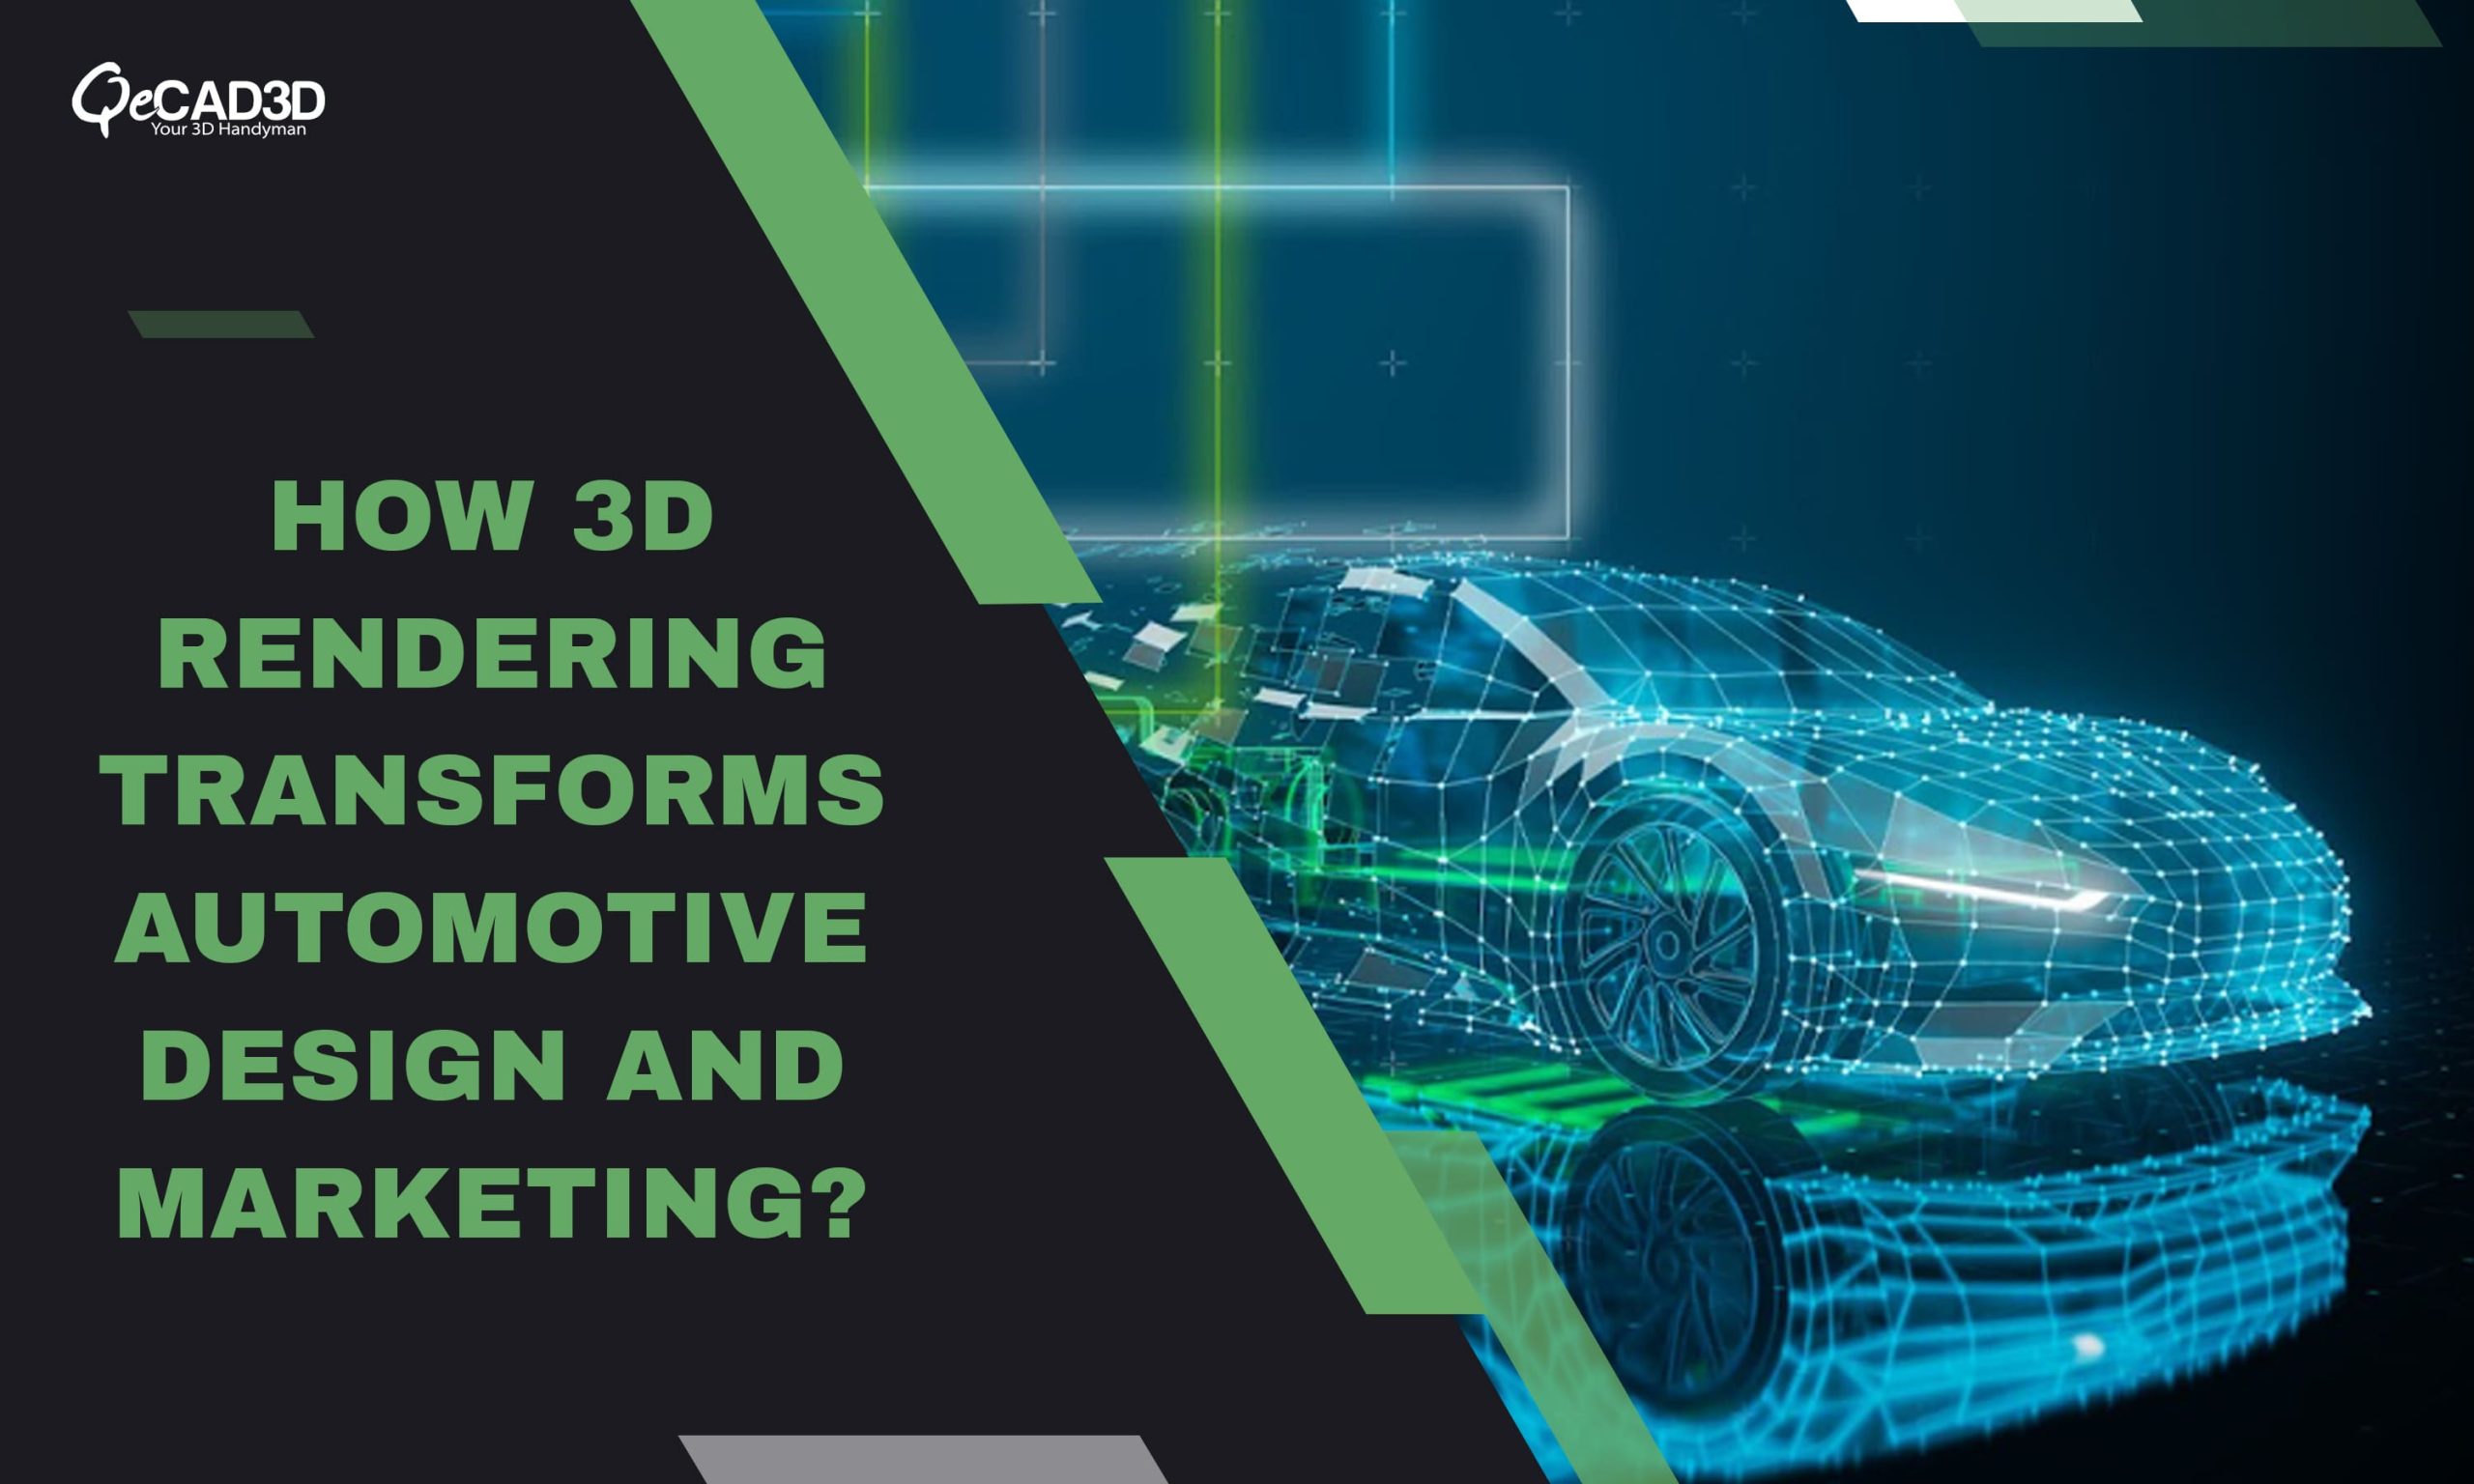 How 3D Rendering Transforms Automotive Design and Marketing?